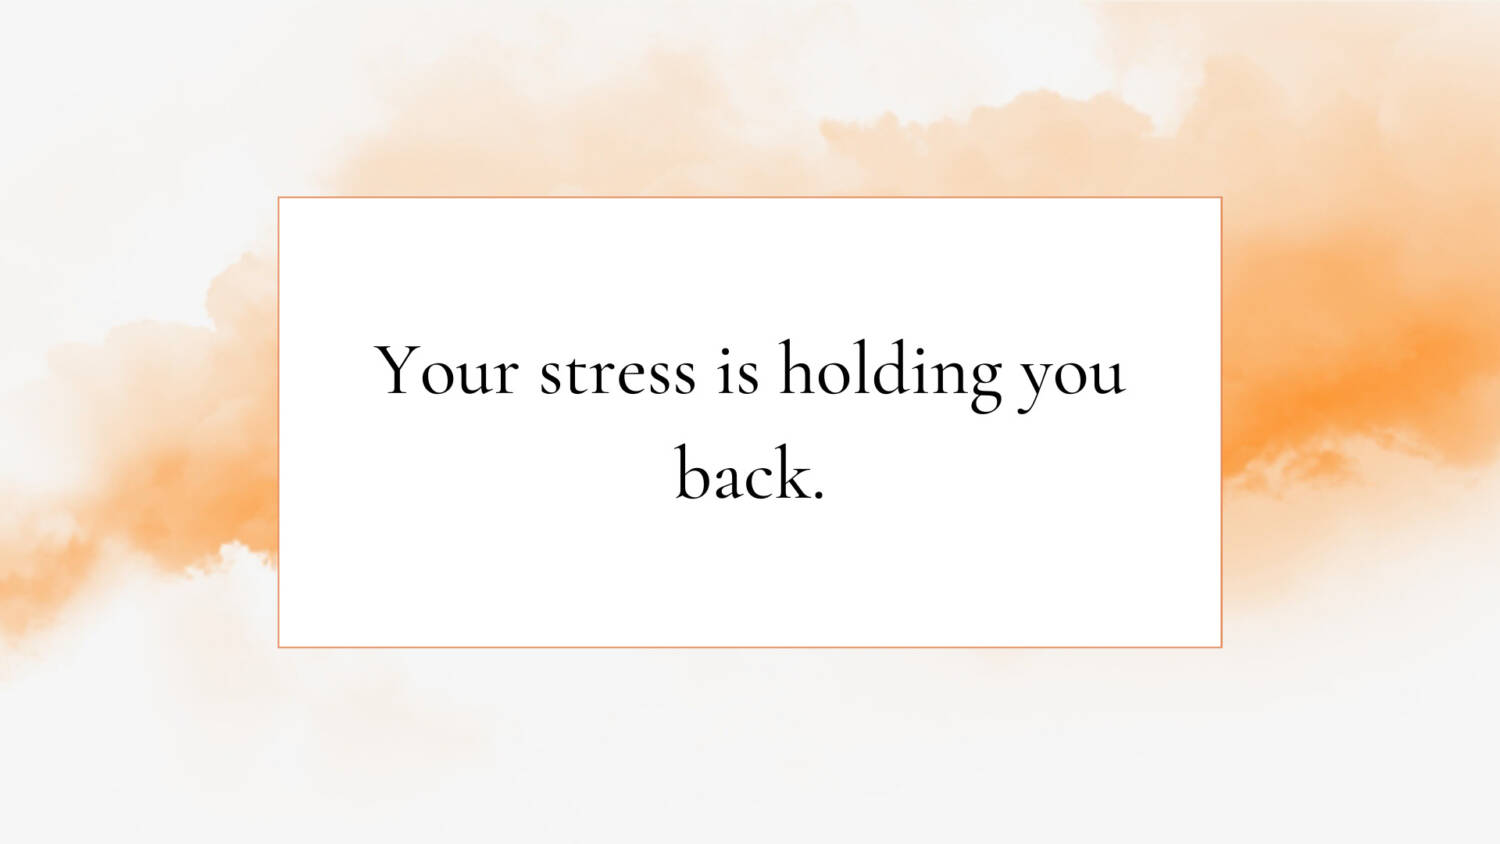 Your stress is holding you back.